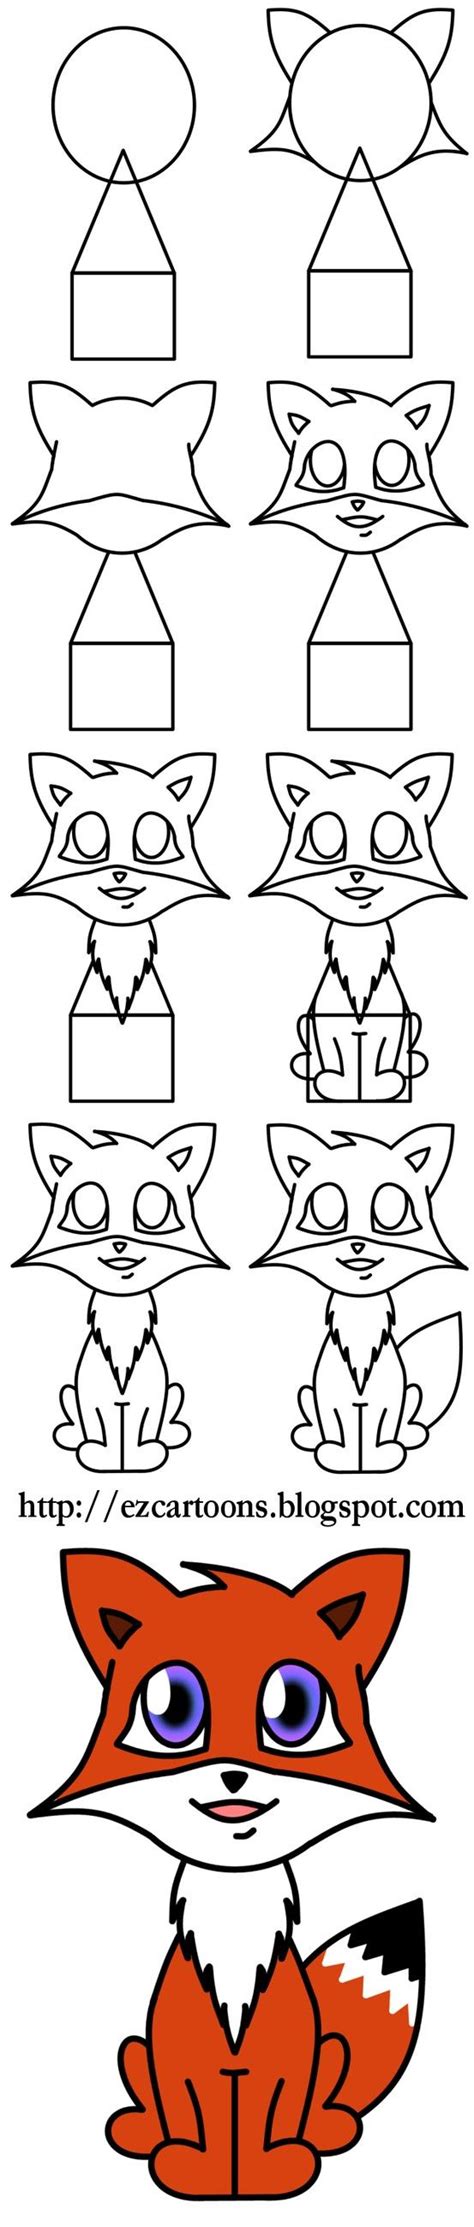 How To Draw A Cartoon Fox Easy Cartoon Drawings Doodle Drawings Easy